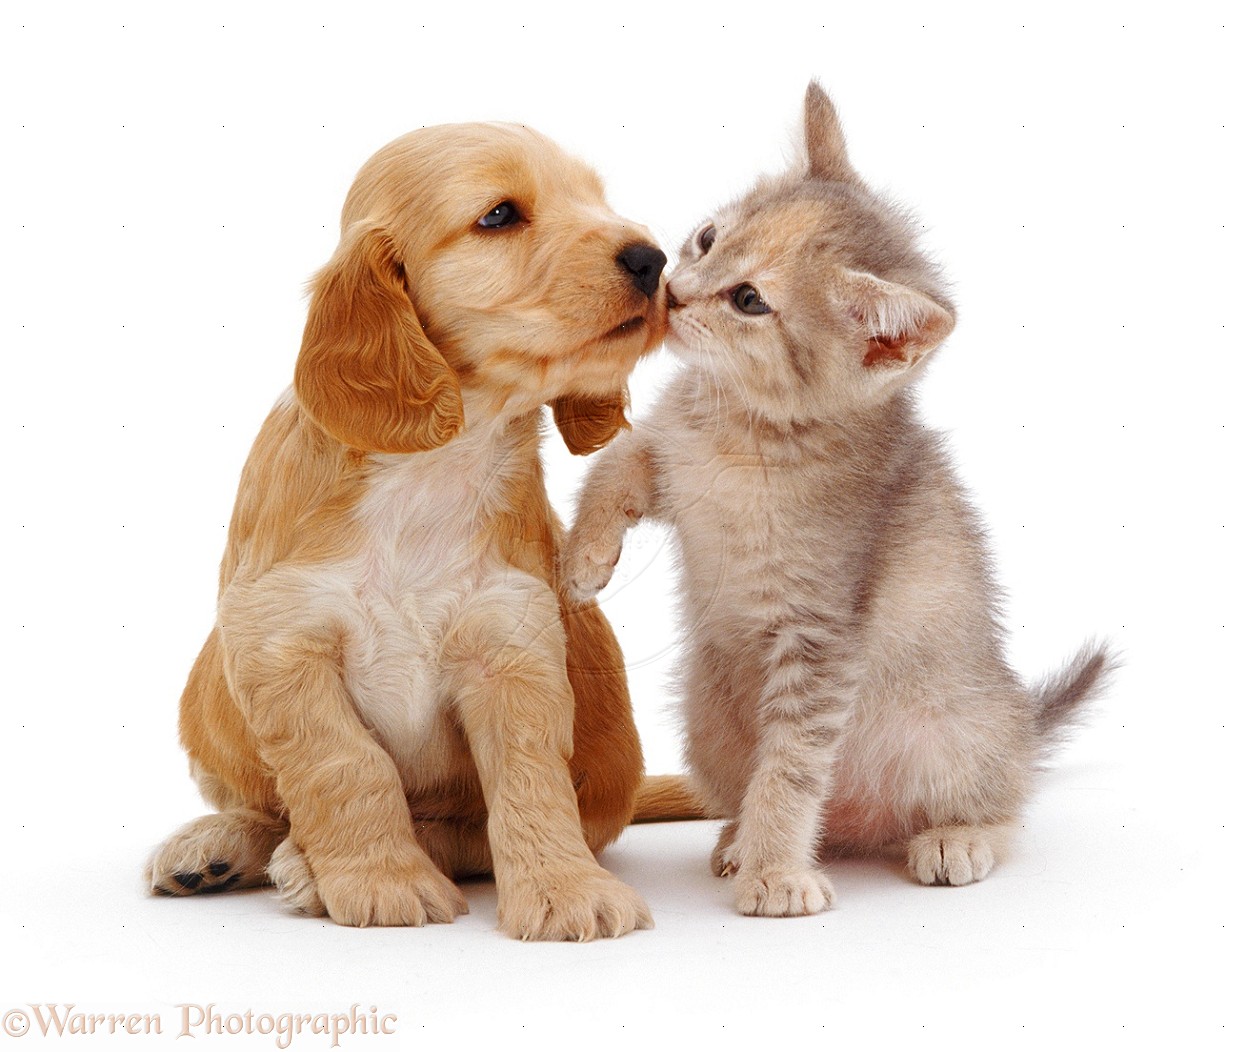 Puppies And Kittens Kissing Wallpaper Photos